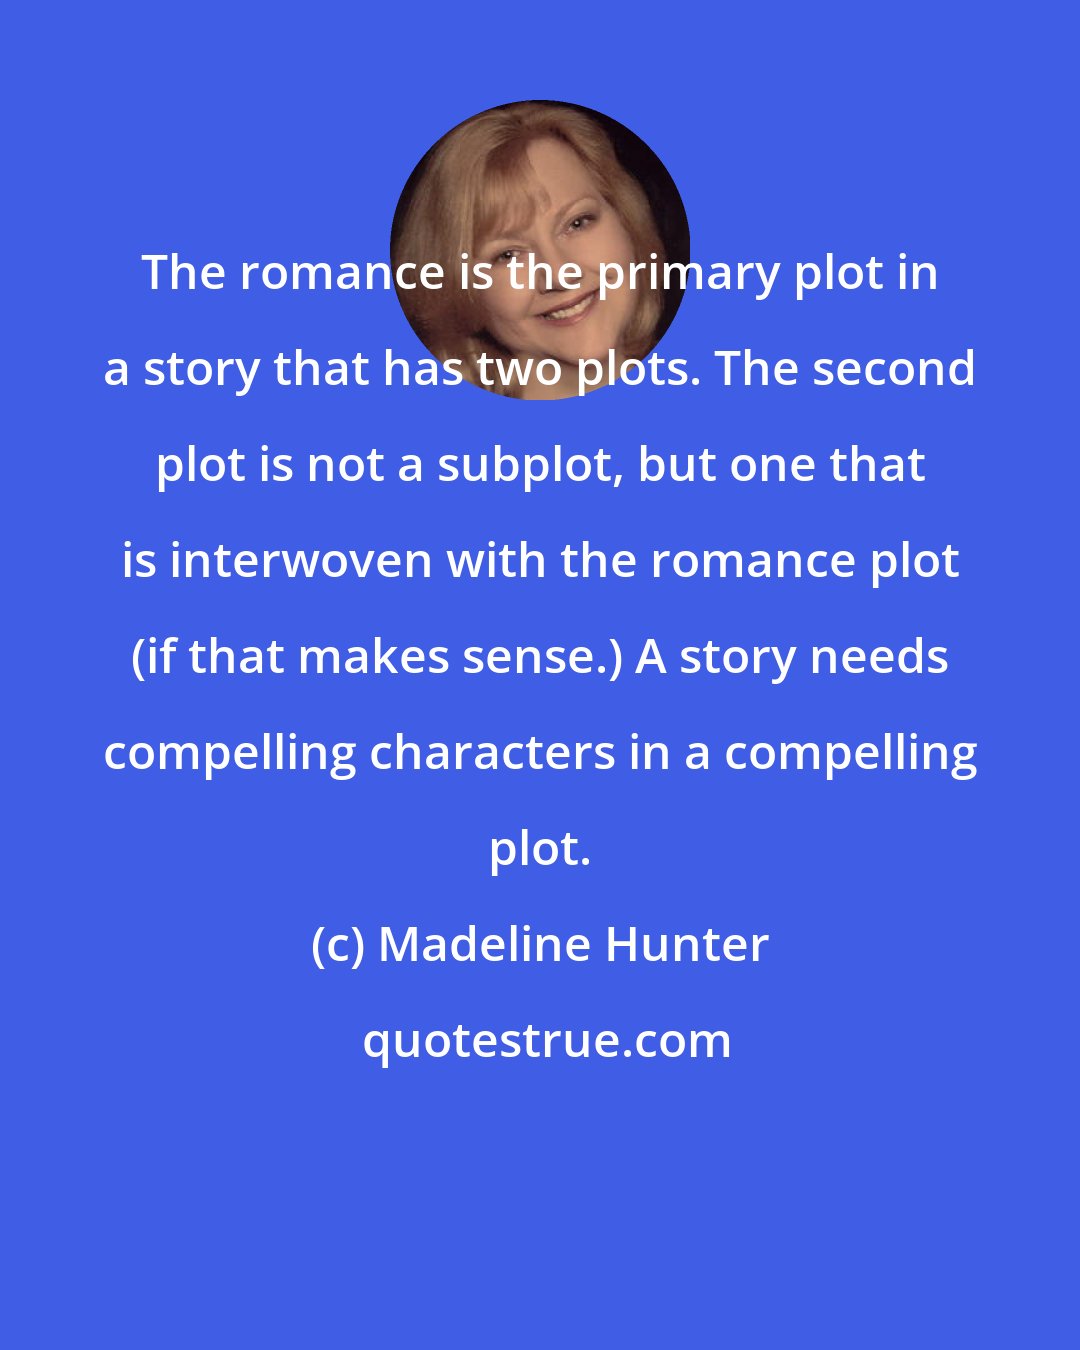 Madeline Hunter: The romance is the primary plot in a story that has two plots. The second plot is not a subplot, but one that is interwoven with the romance plot (if that makes sense.) A story needs compelling characters in a compelling plot.